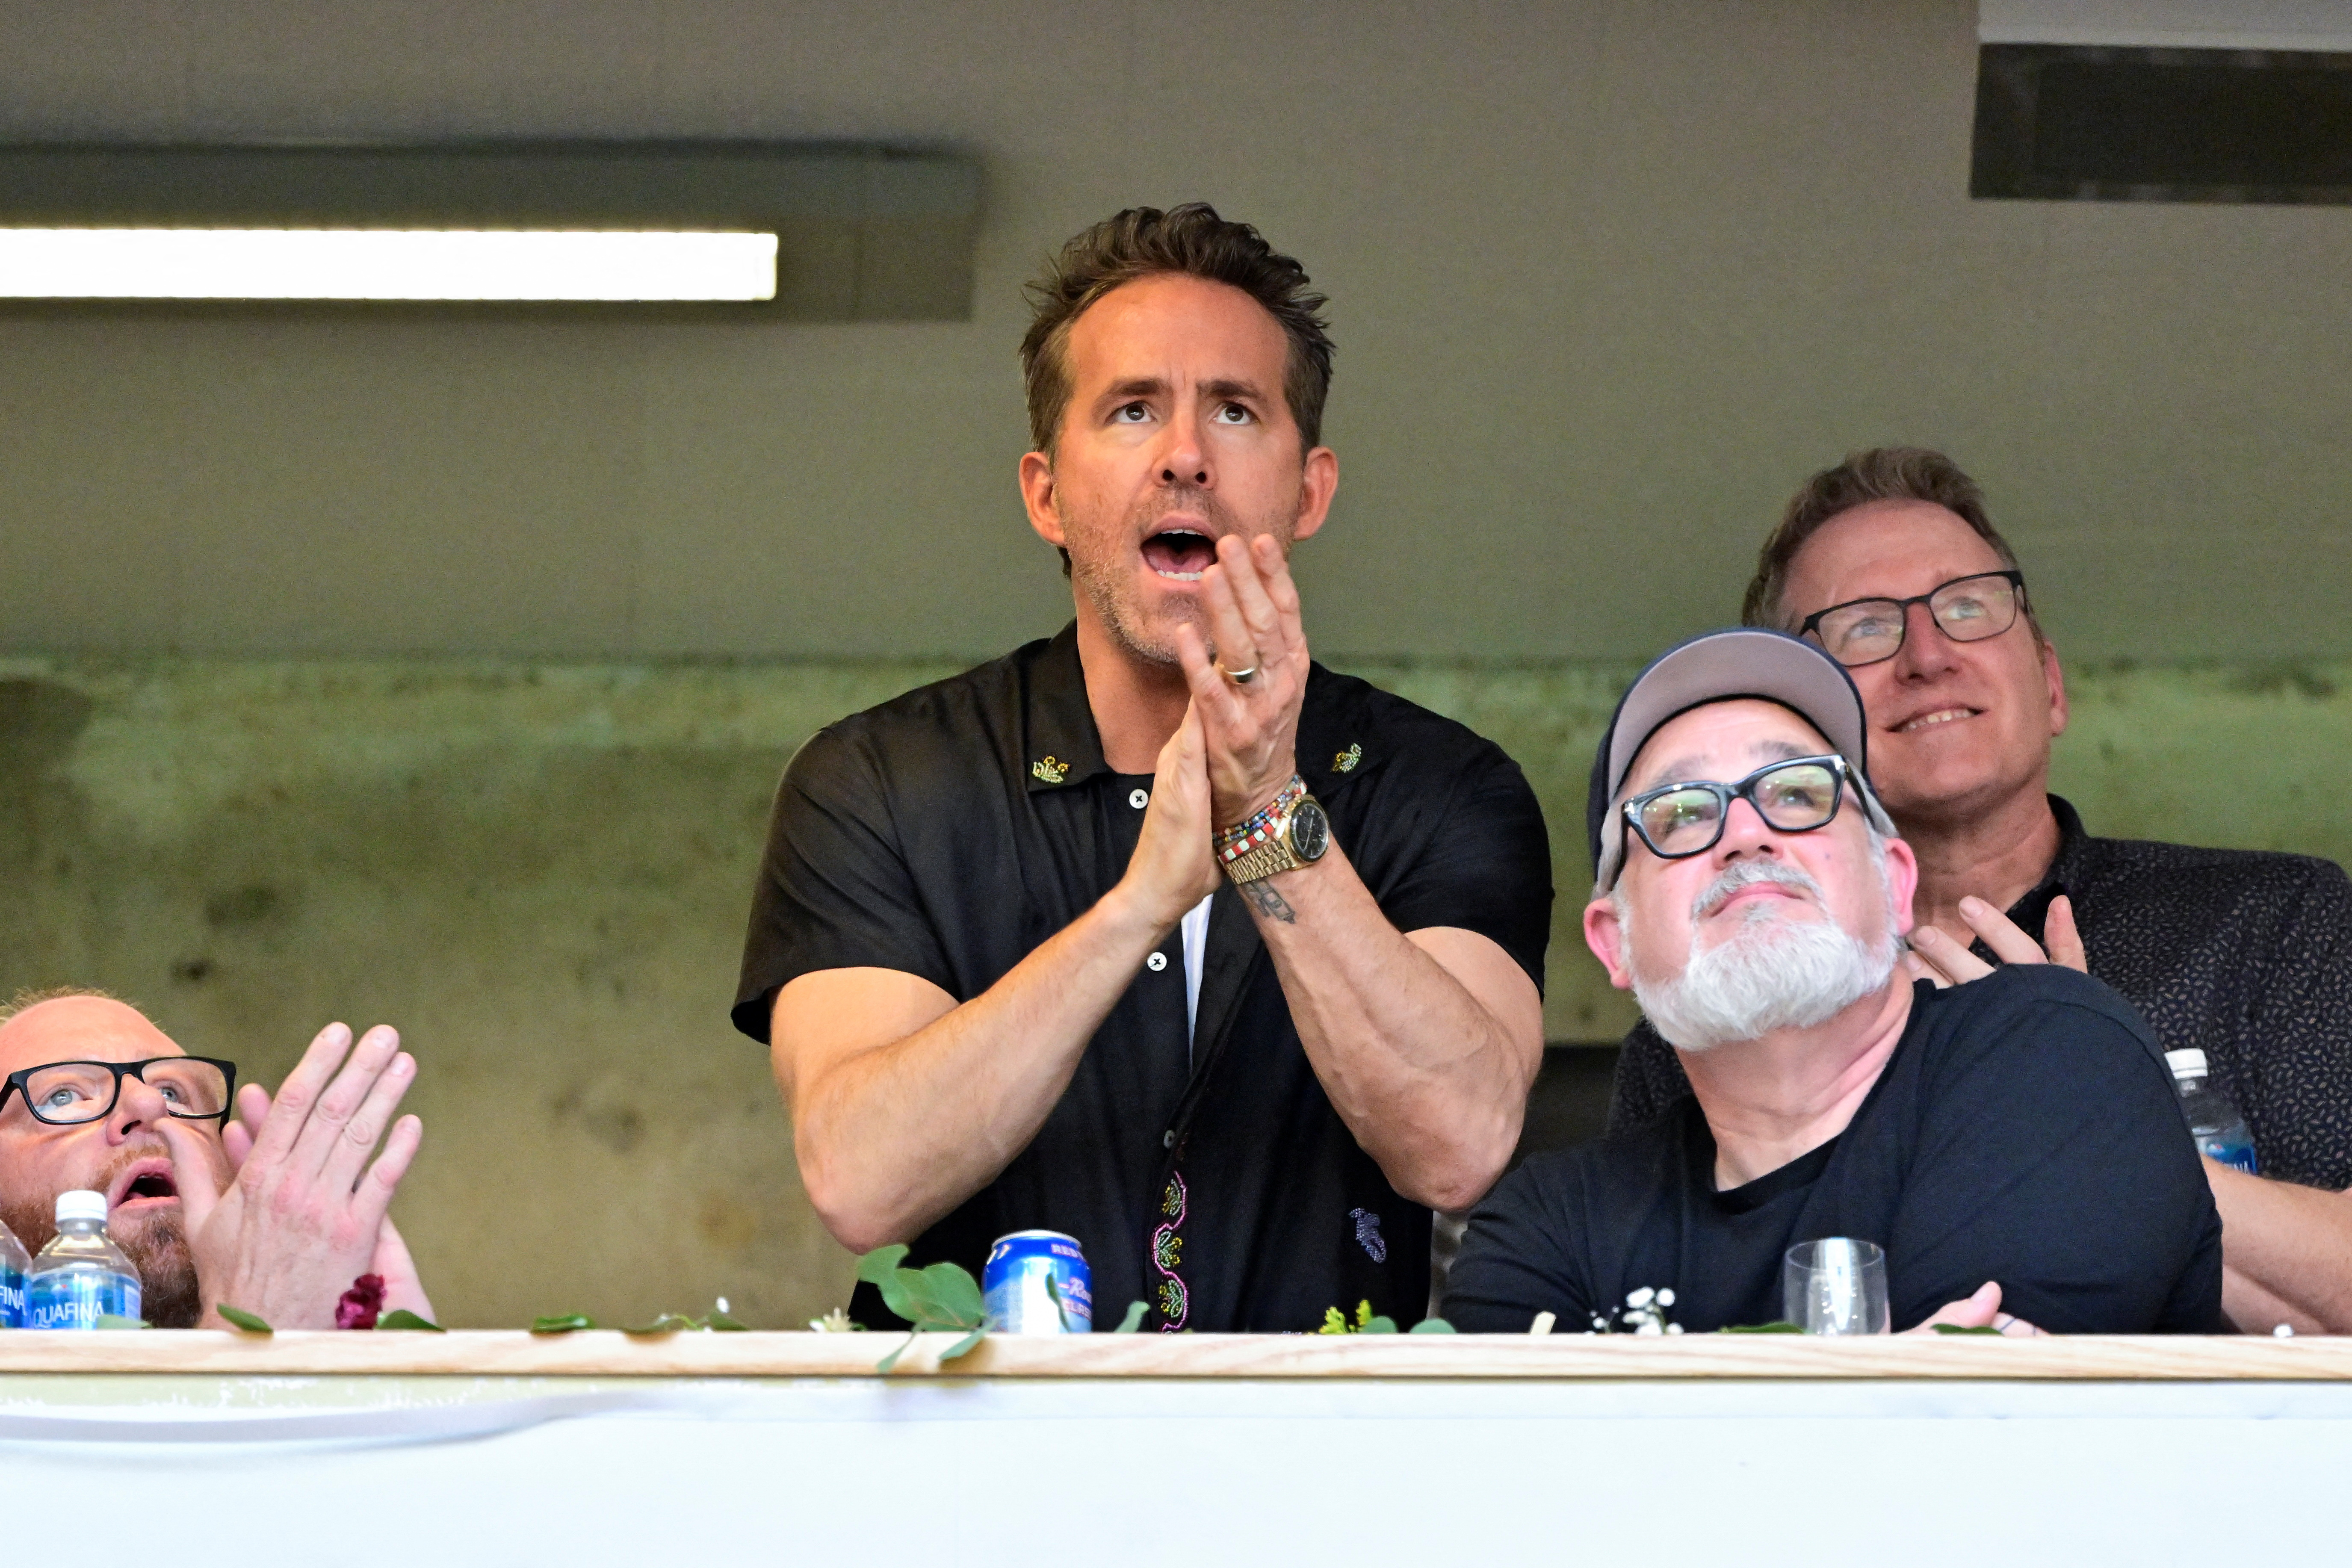 Actor Ryan Reynolds reacts as his Premier League soccer club Wrexham AFC play a friendly match against his hometown team, the Vancouver Whitecaps, in Canada